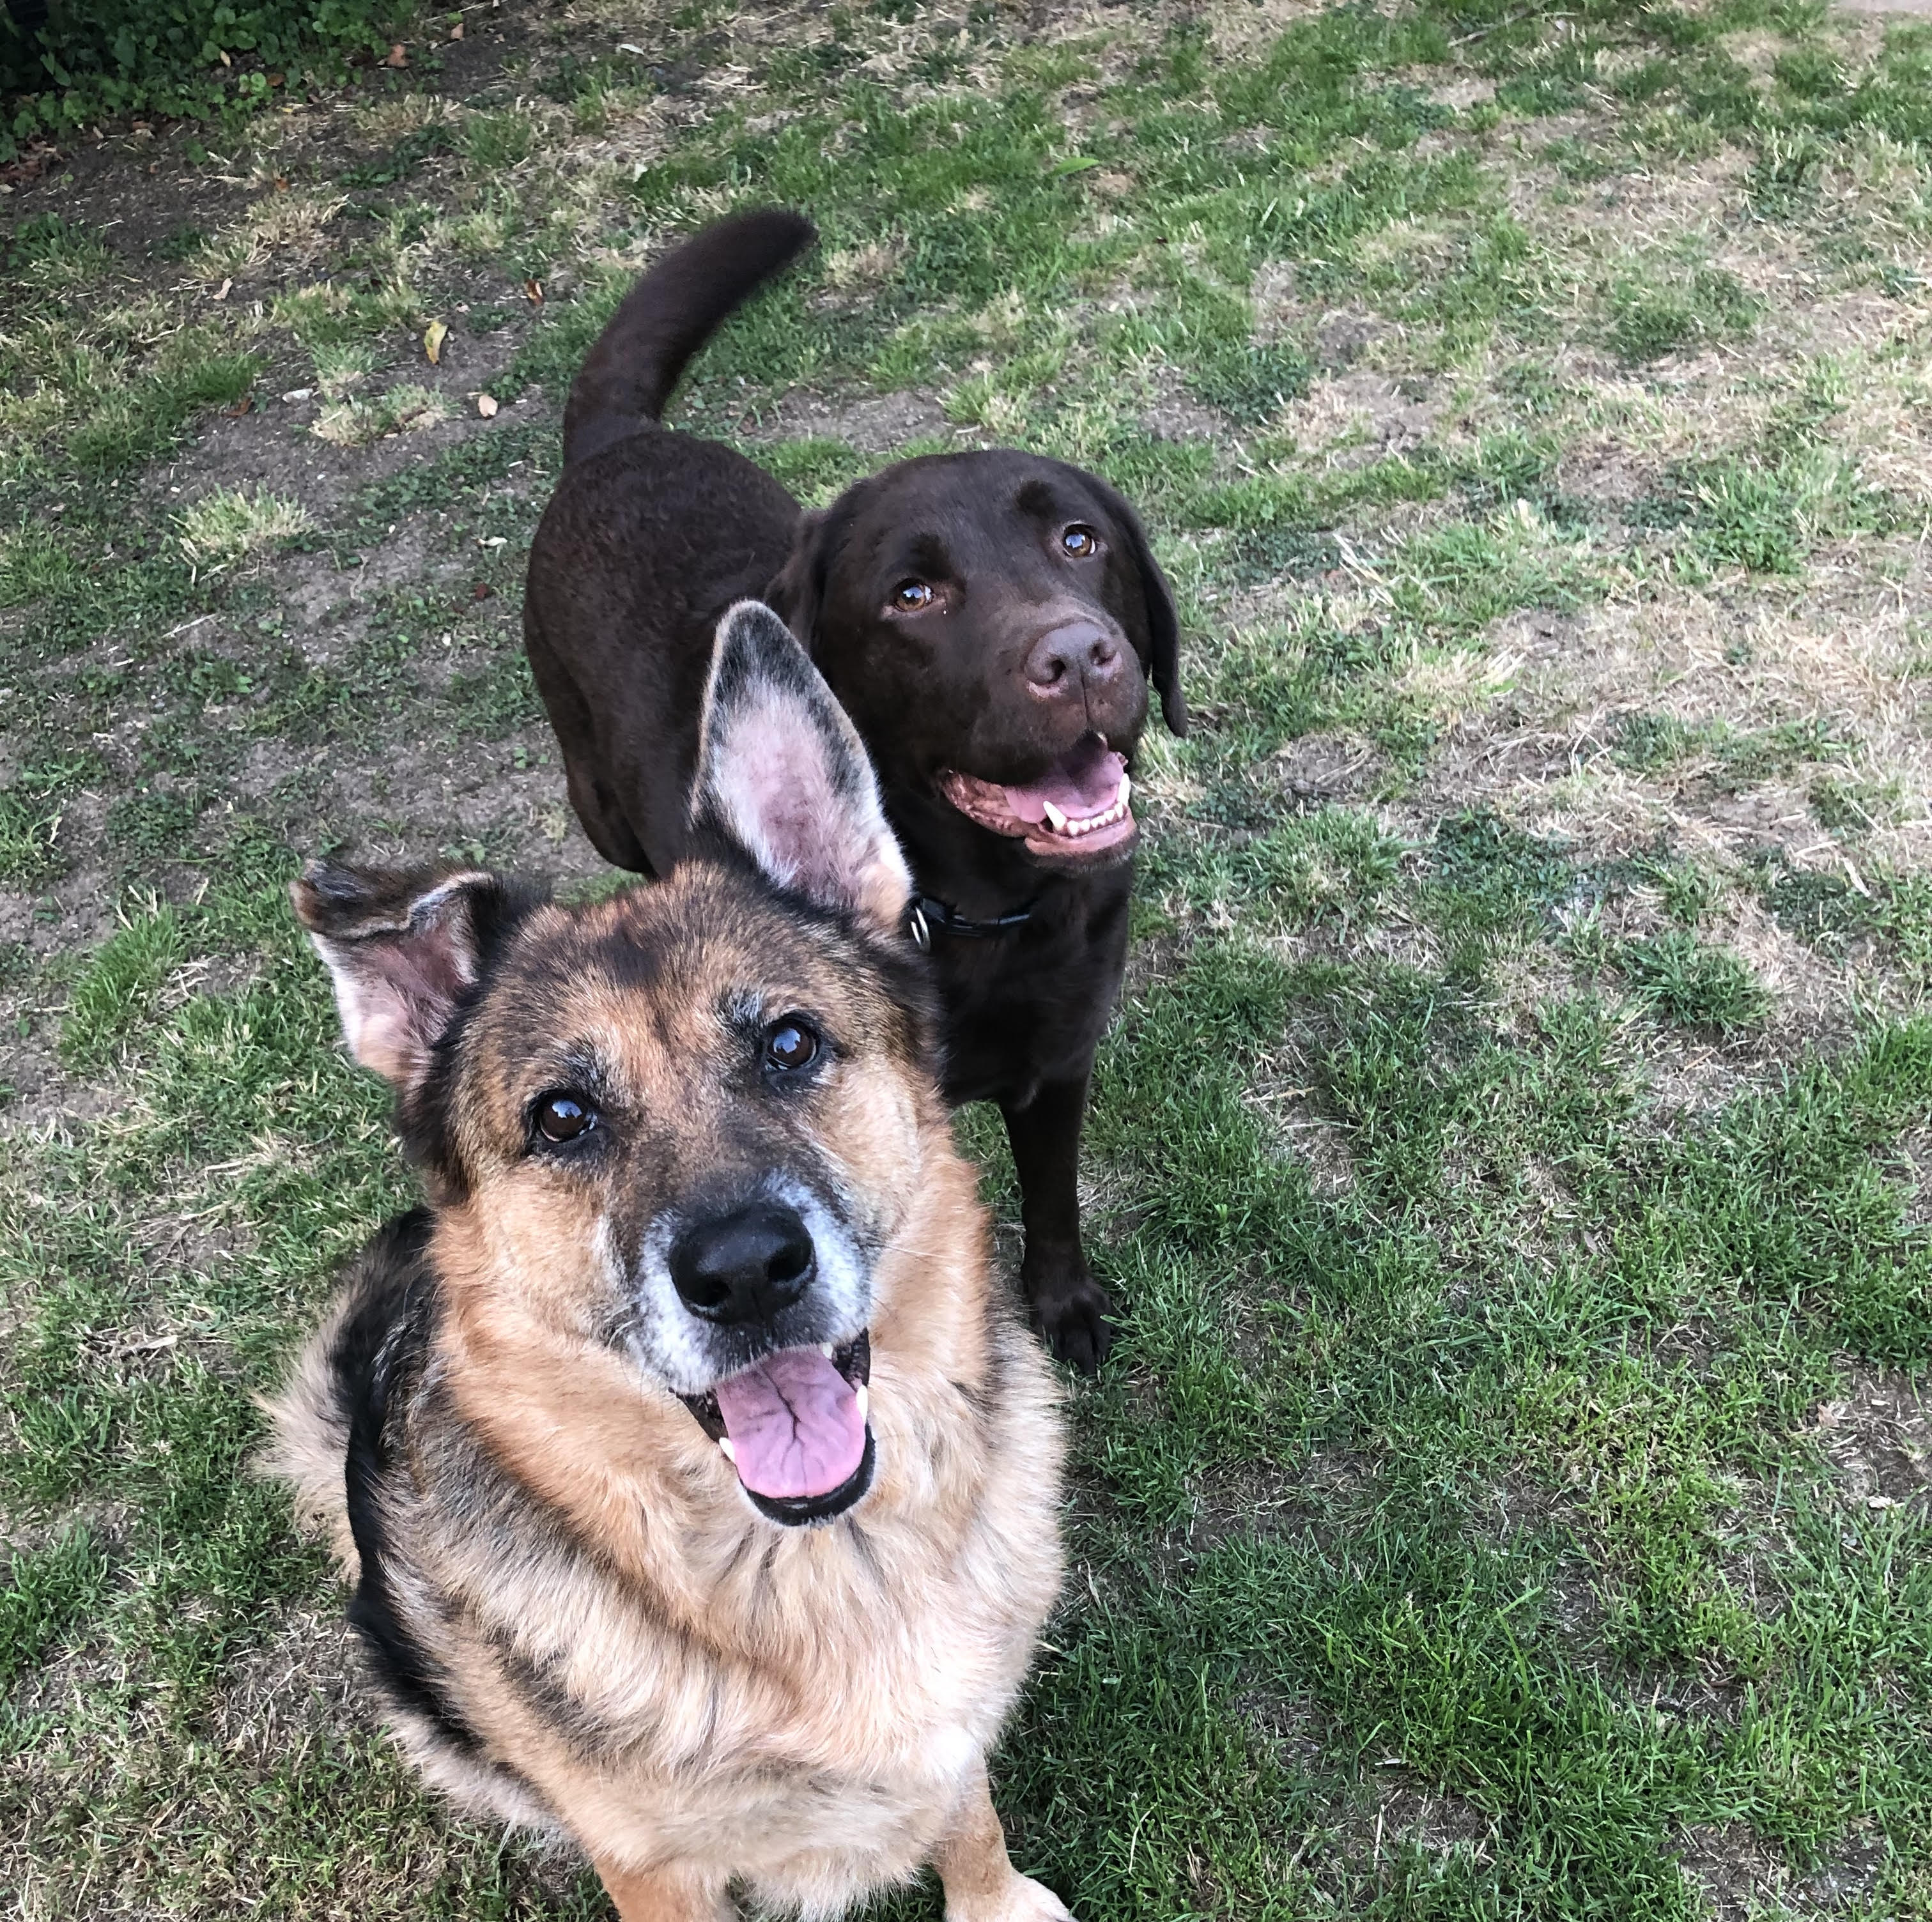 Picture of 2 dogs, one 1 is a German Shepherd and the other is a Labrador